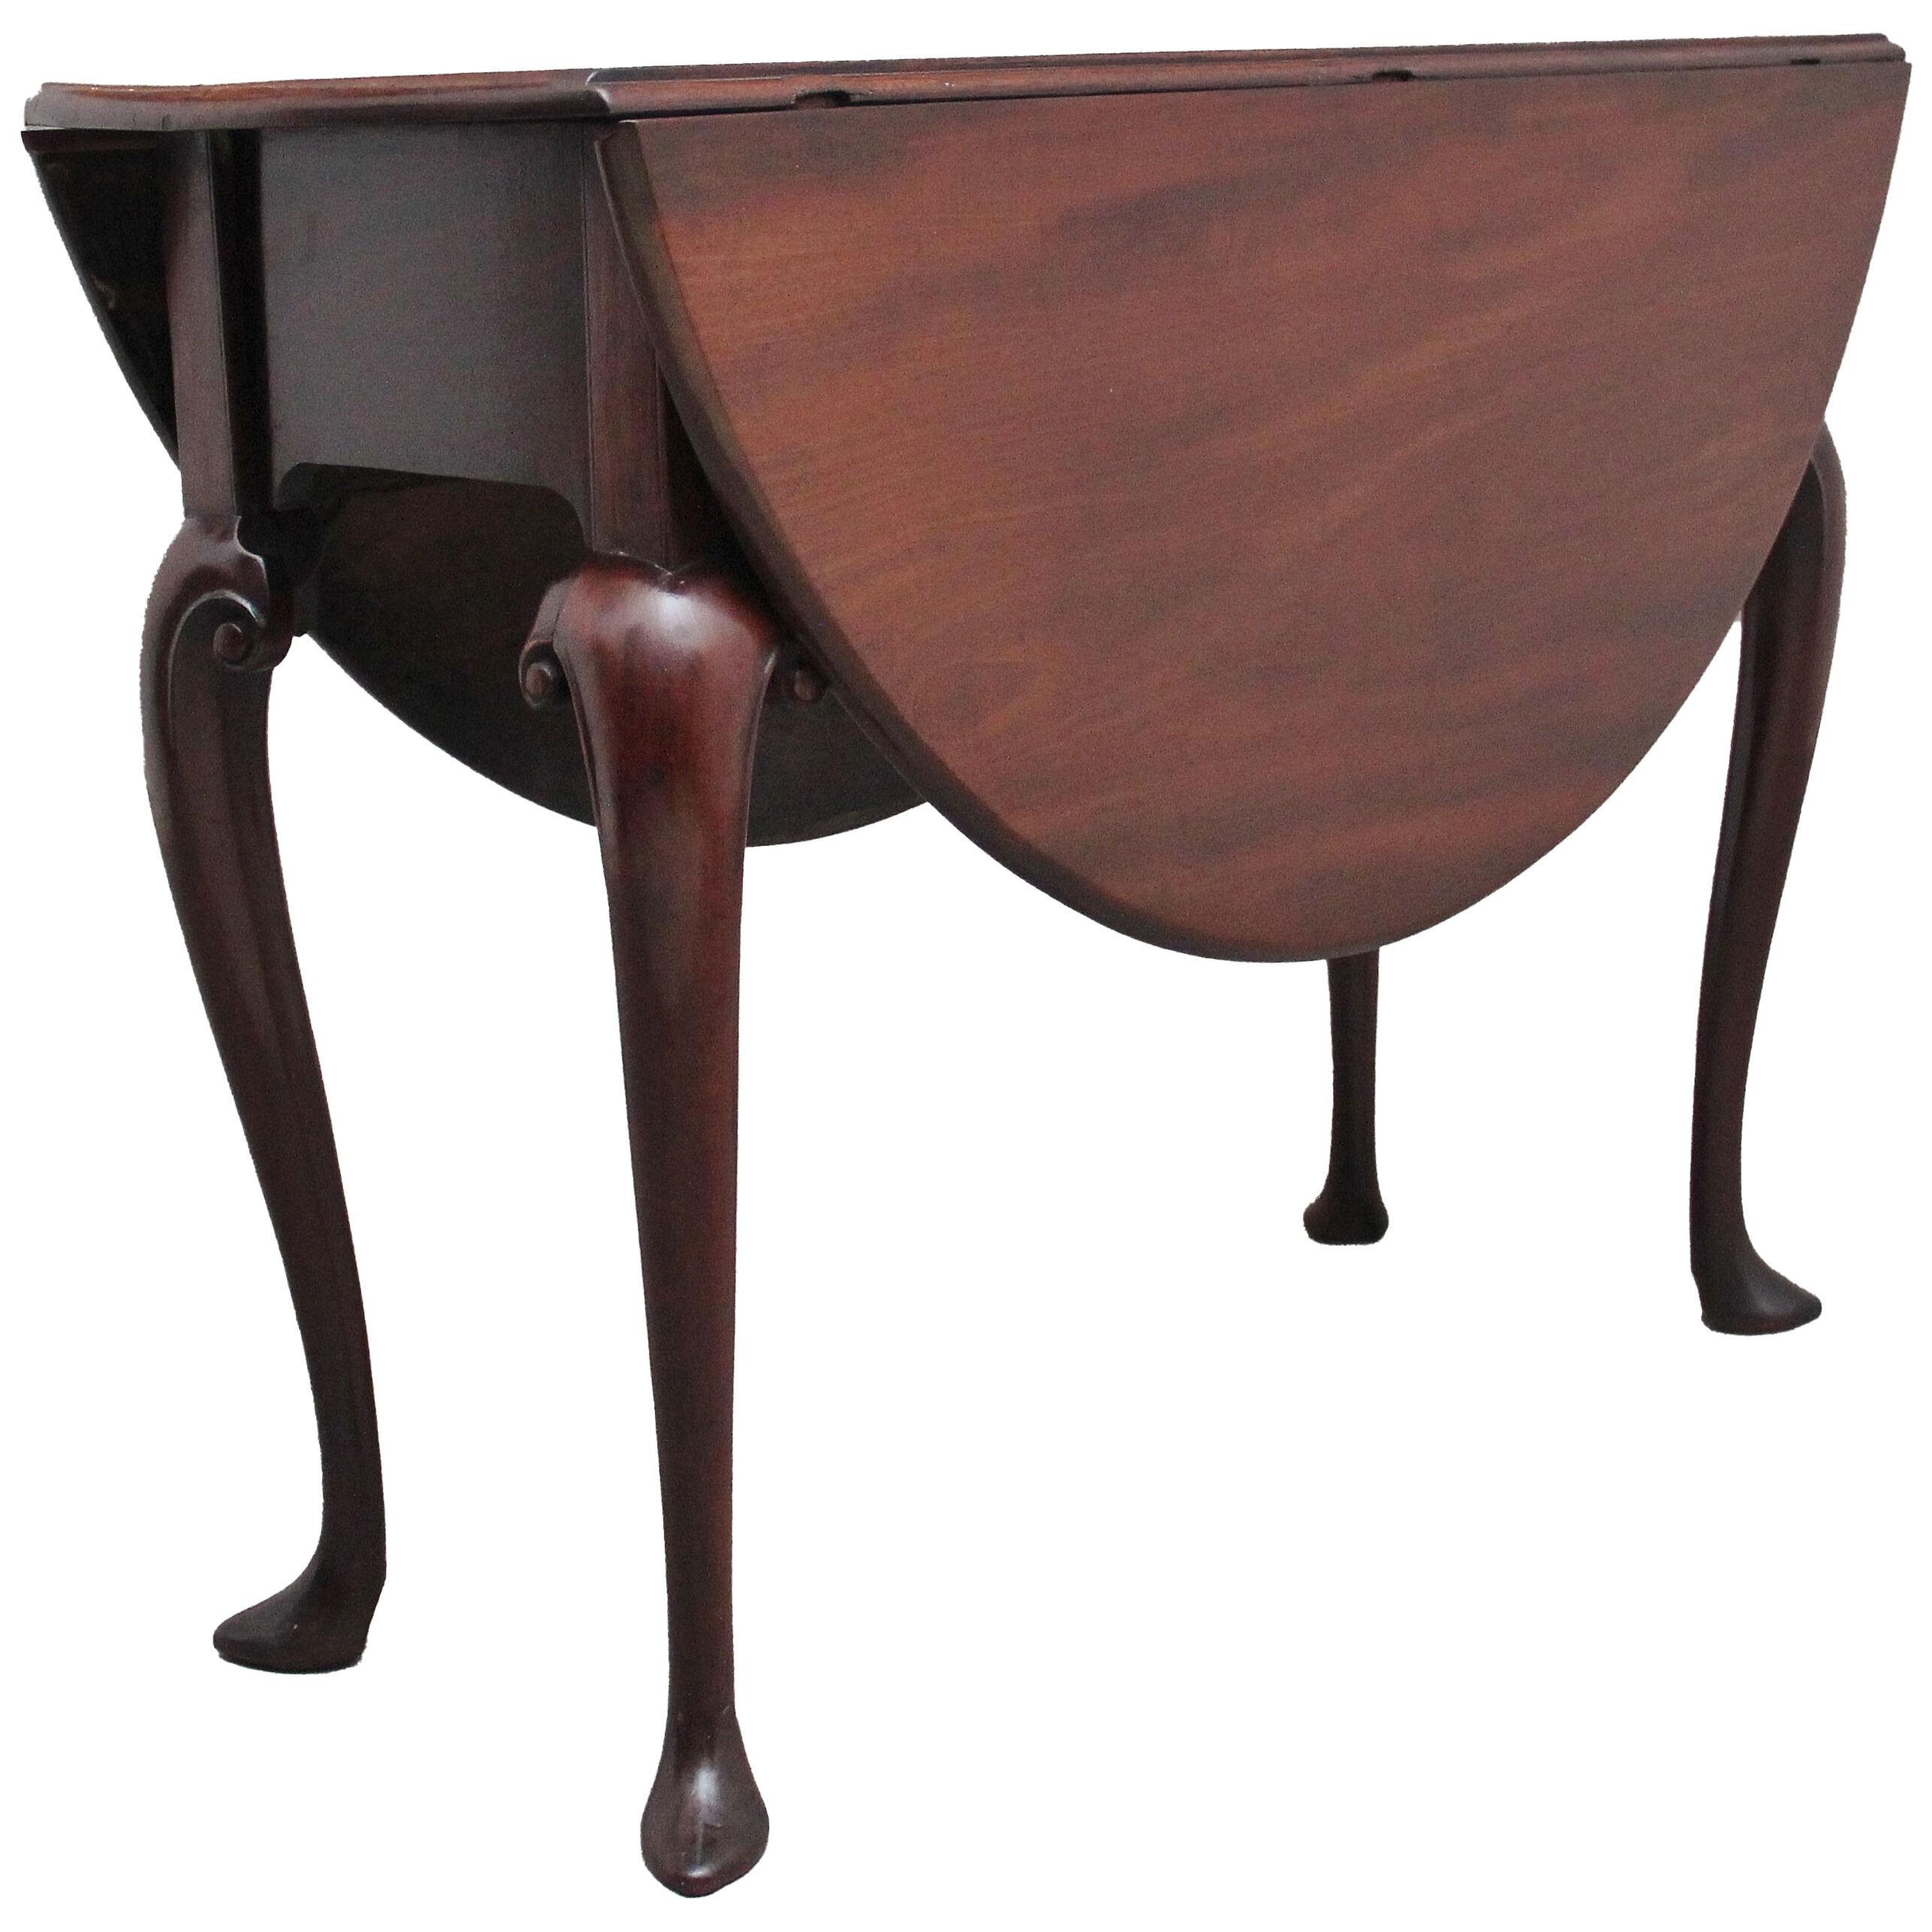 18th Century mahogany drop leaf table from the Georgian period 